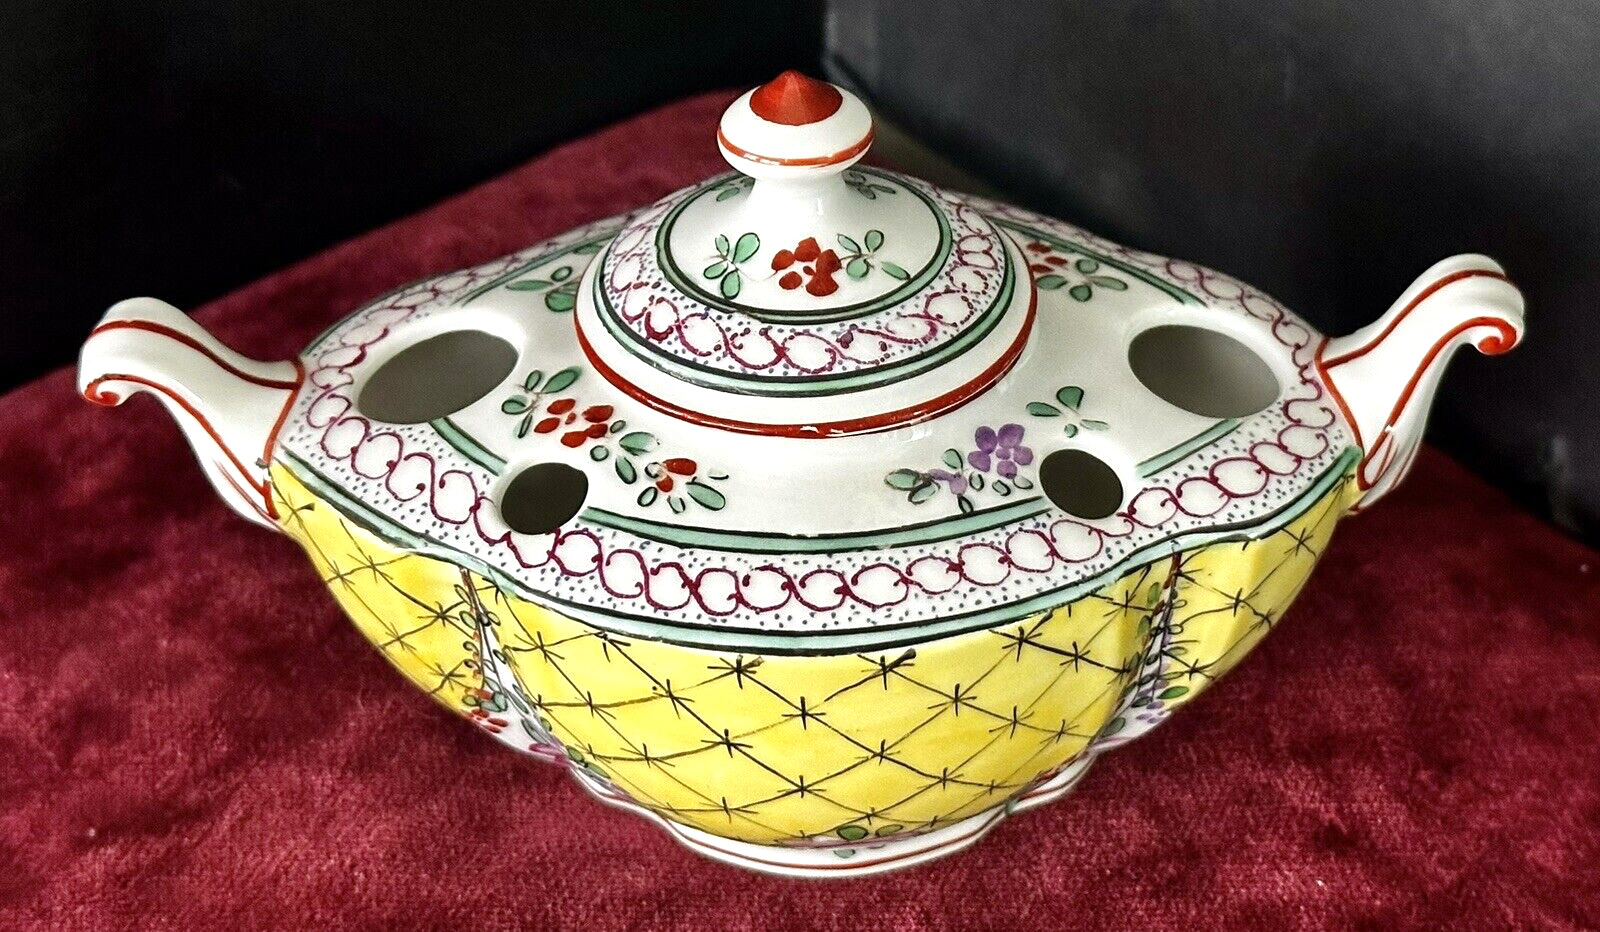 Antique ALADIN Porcelain Hand-painted Inkwell Late 19th Century from FRANCE Rare